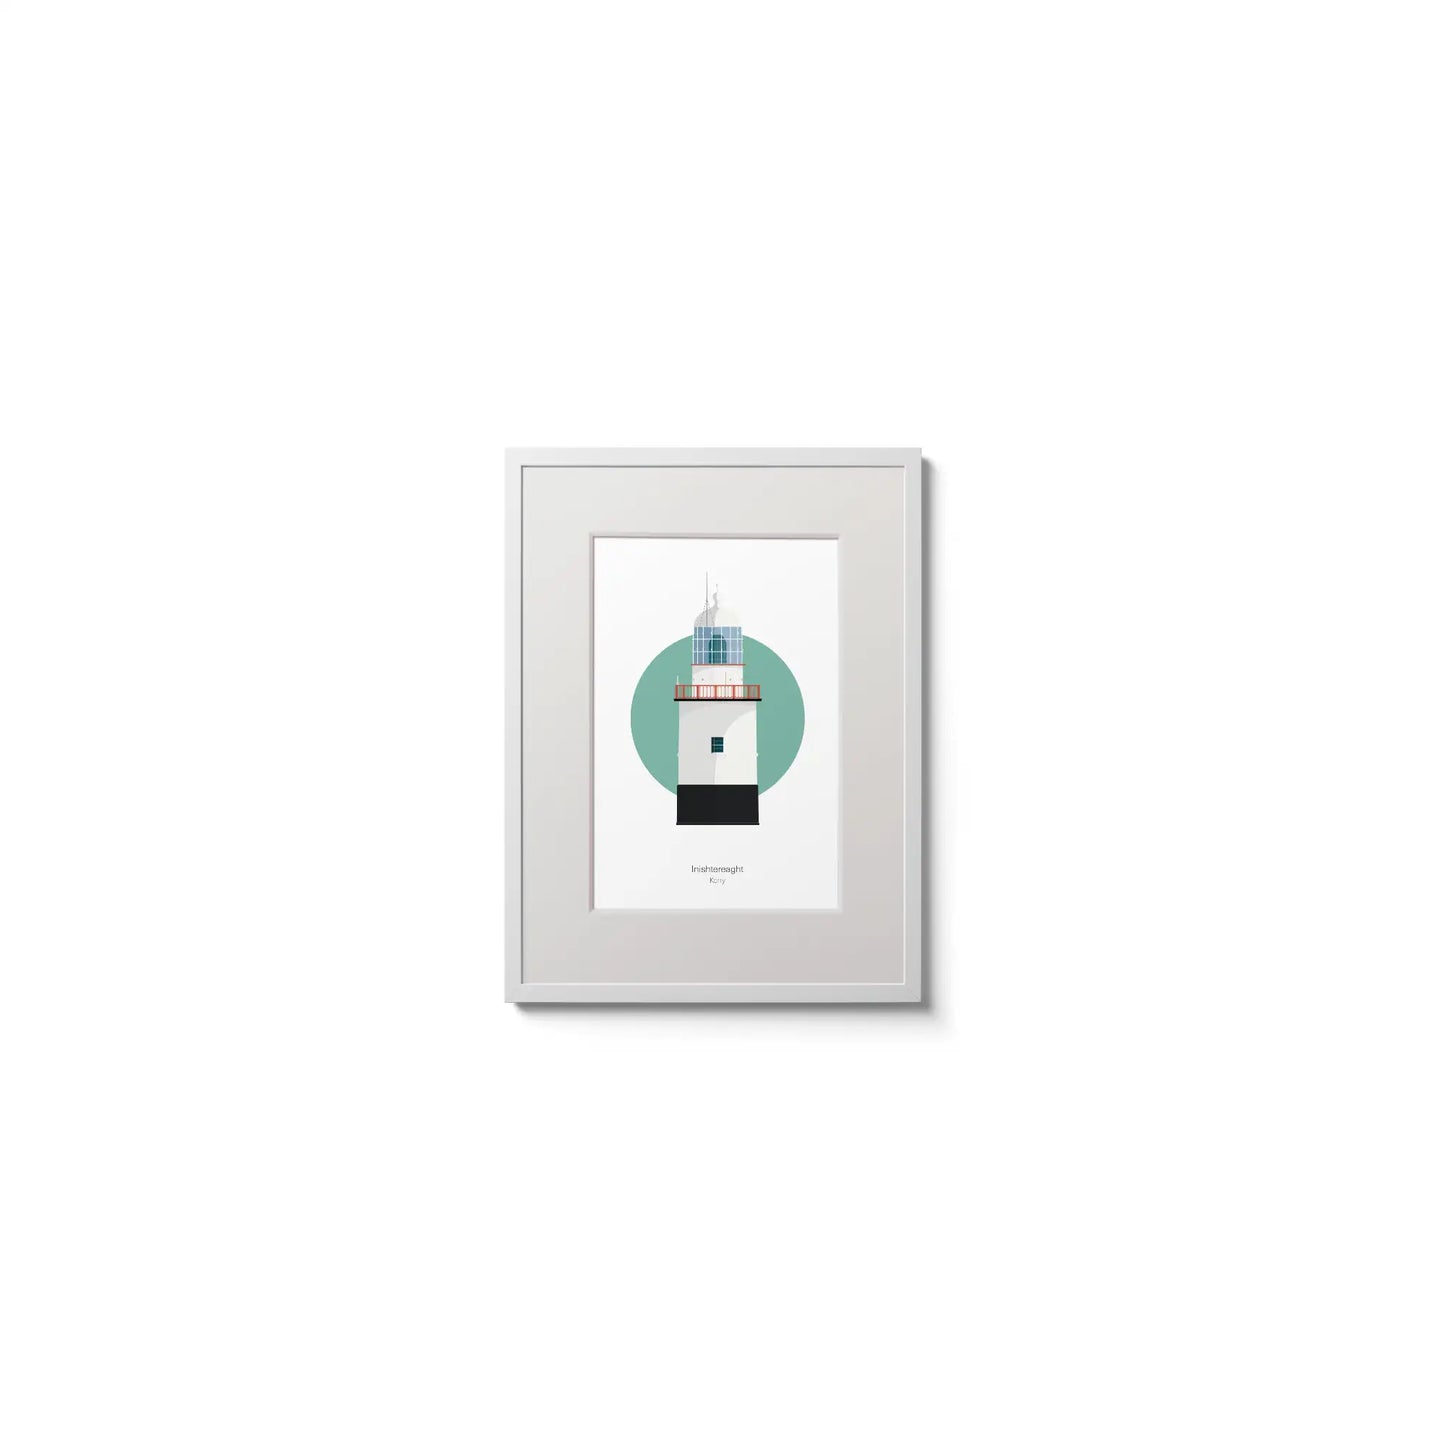 Illustration of Inistearaght lighthouse on a white background inside light blue square,  in a white frame measuring 15x20cm.